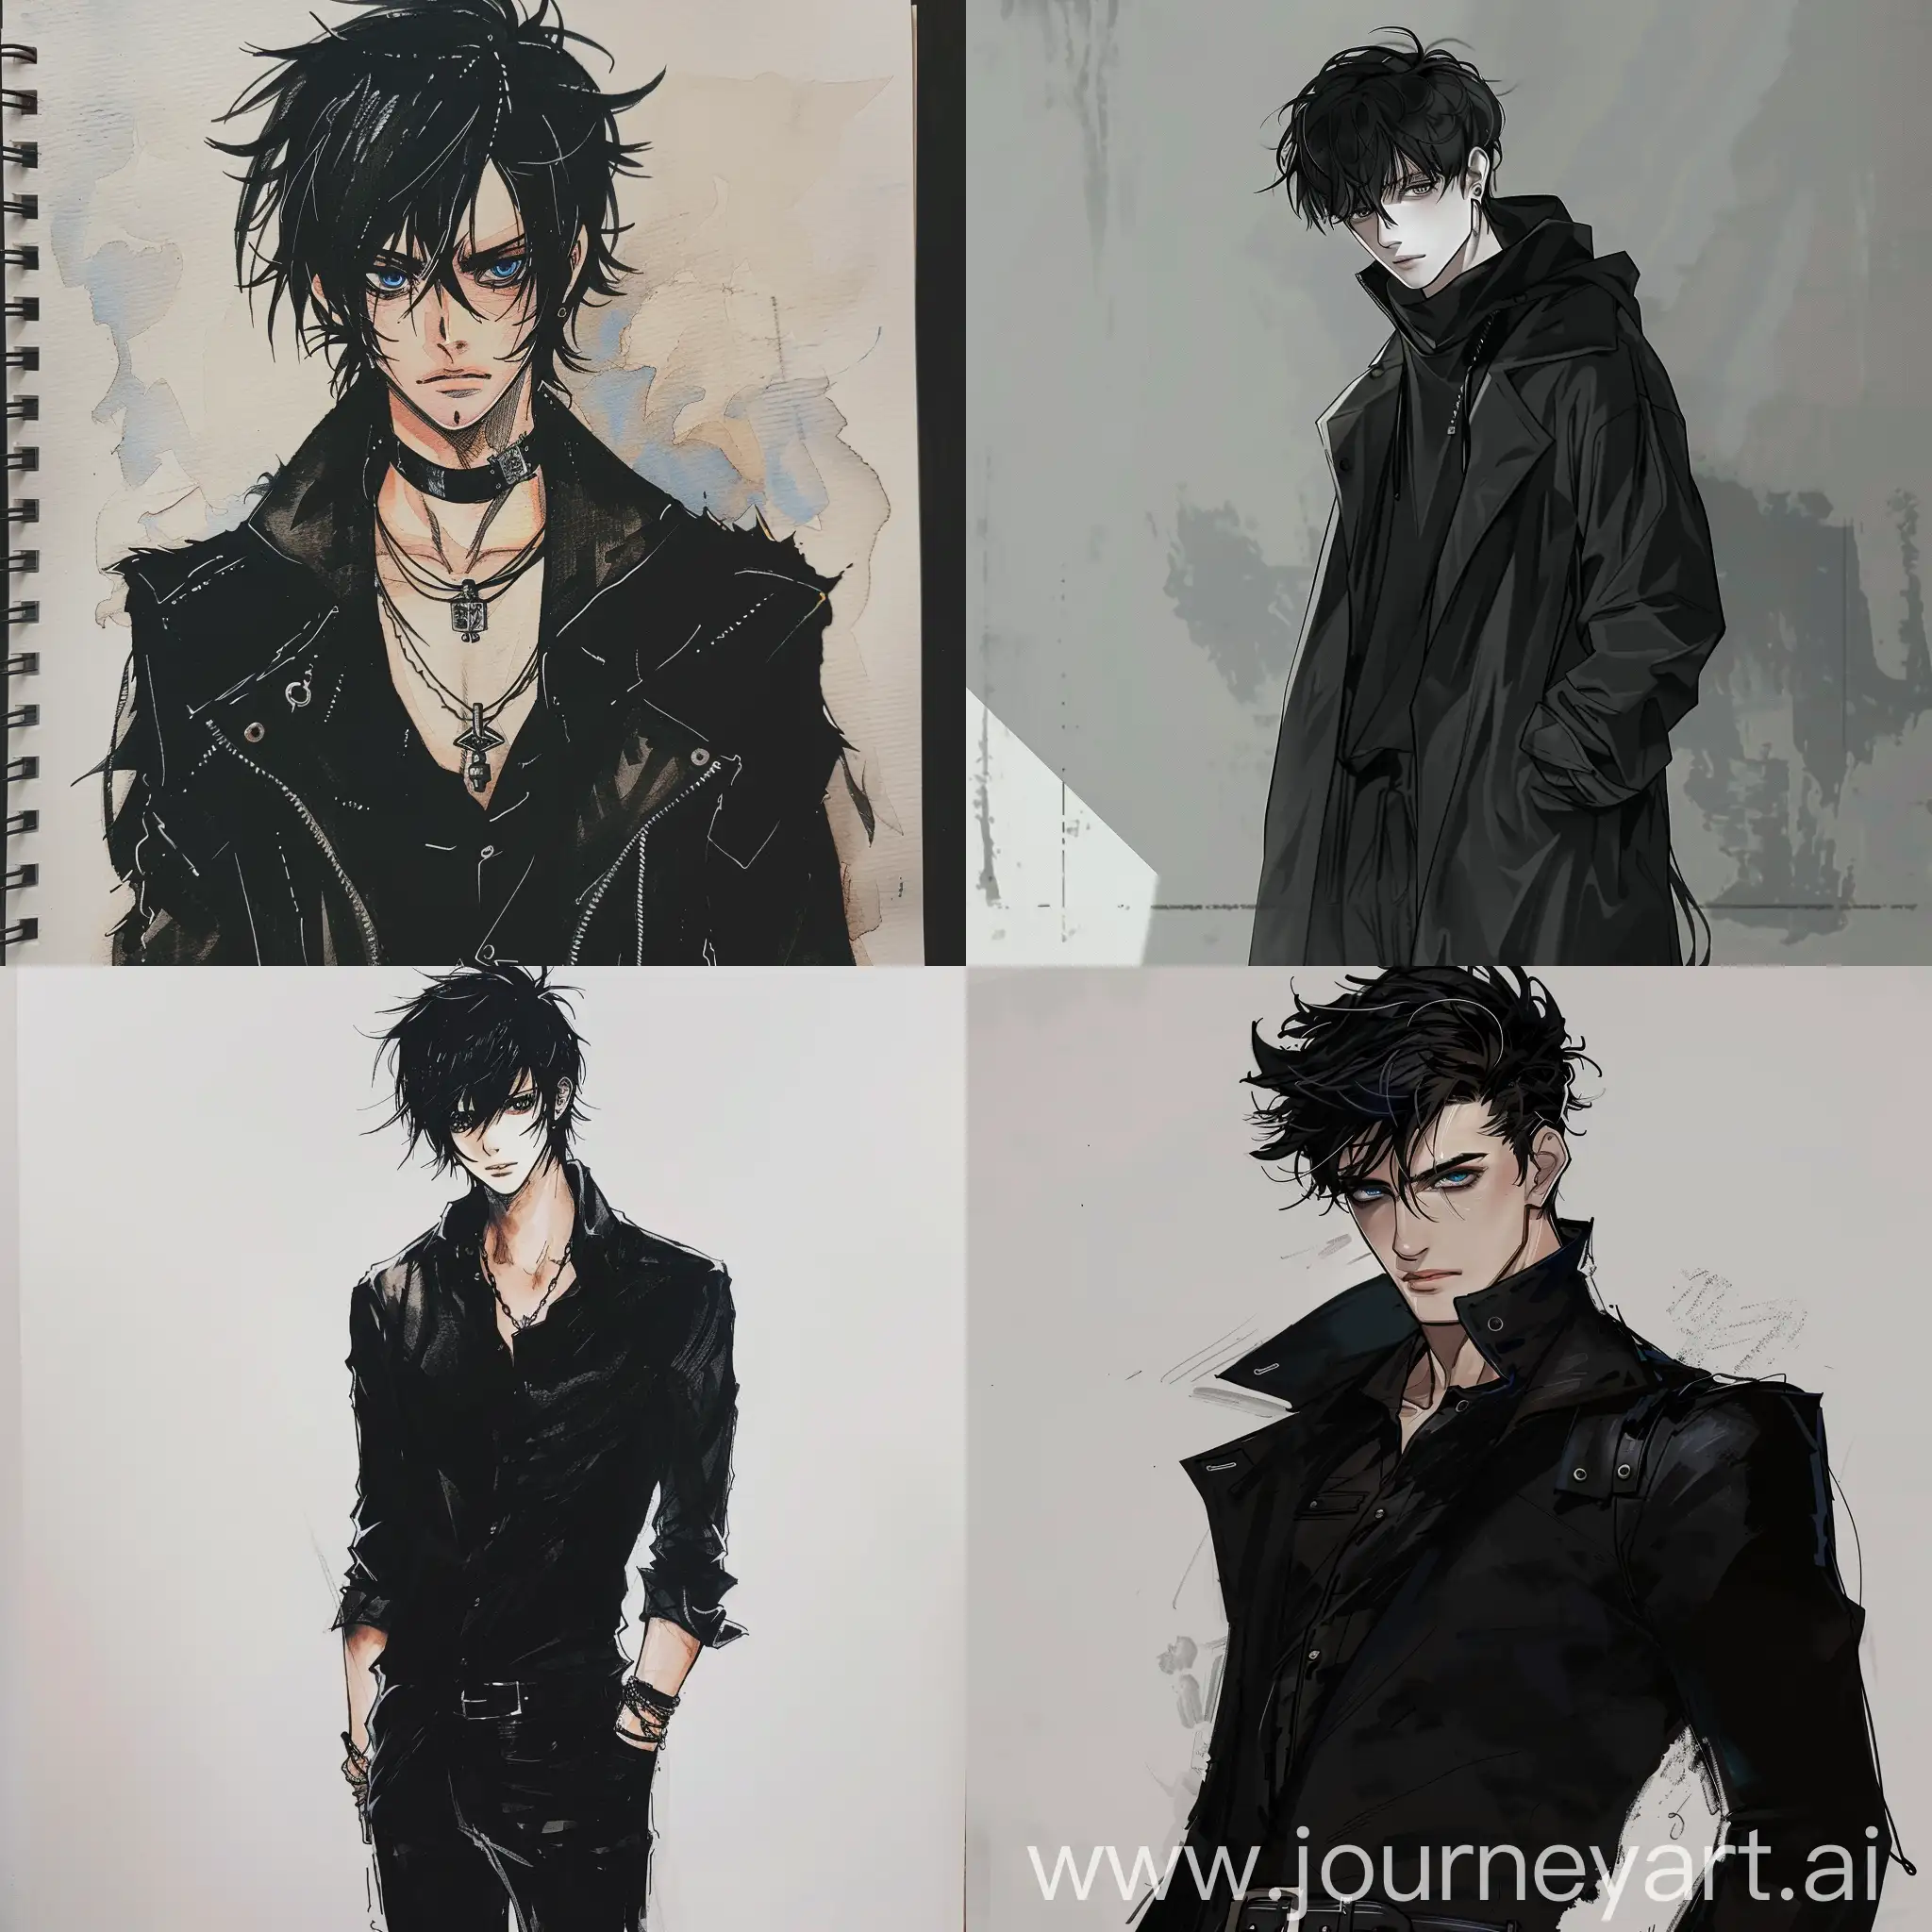 in the style of manga drawing, a tall guy with black hair,in black clothes,blue eyes,tall